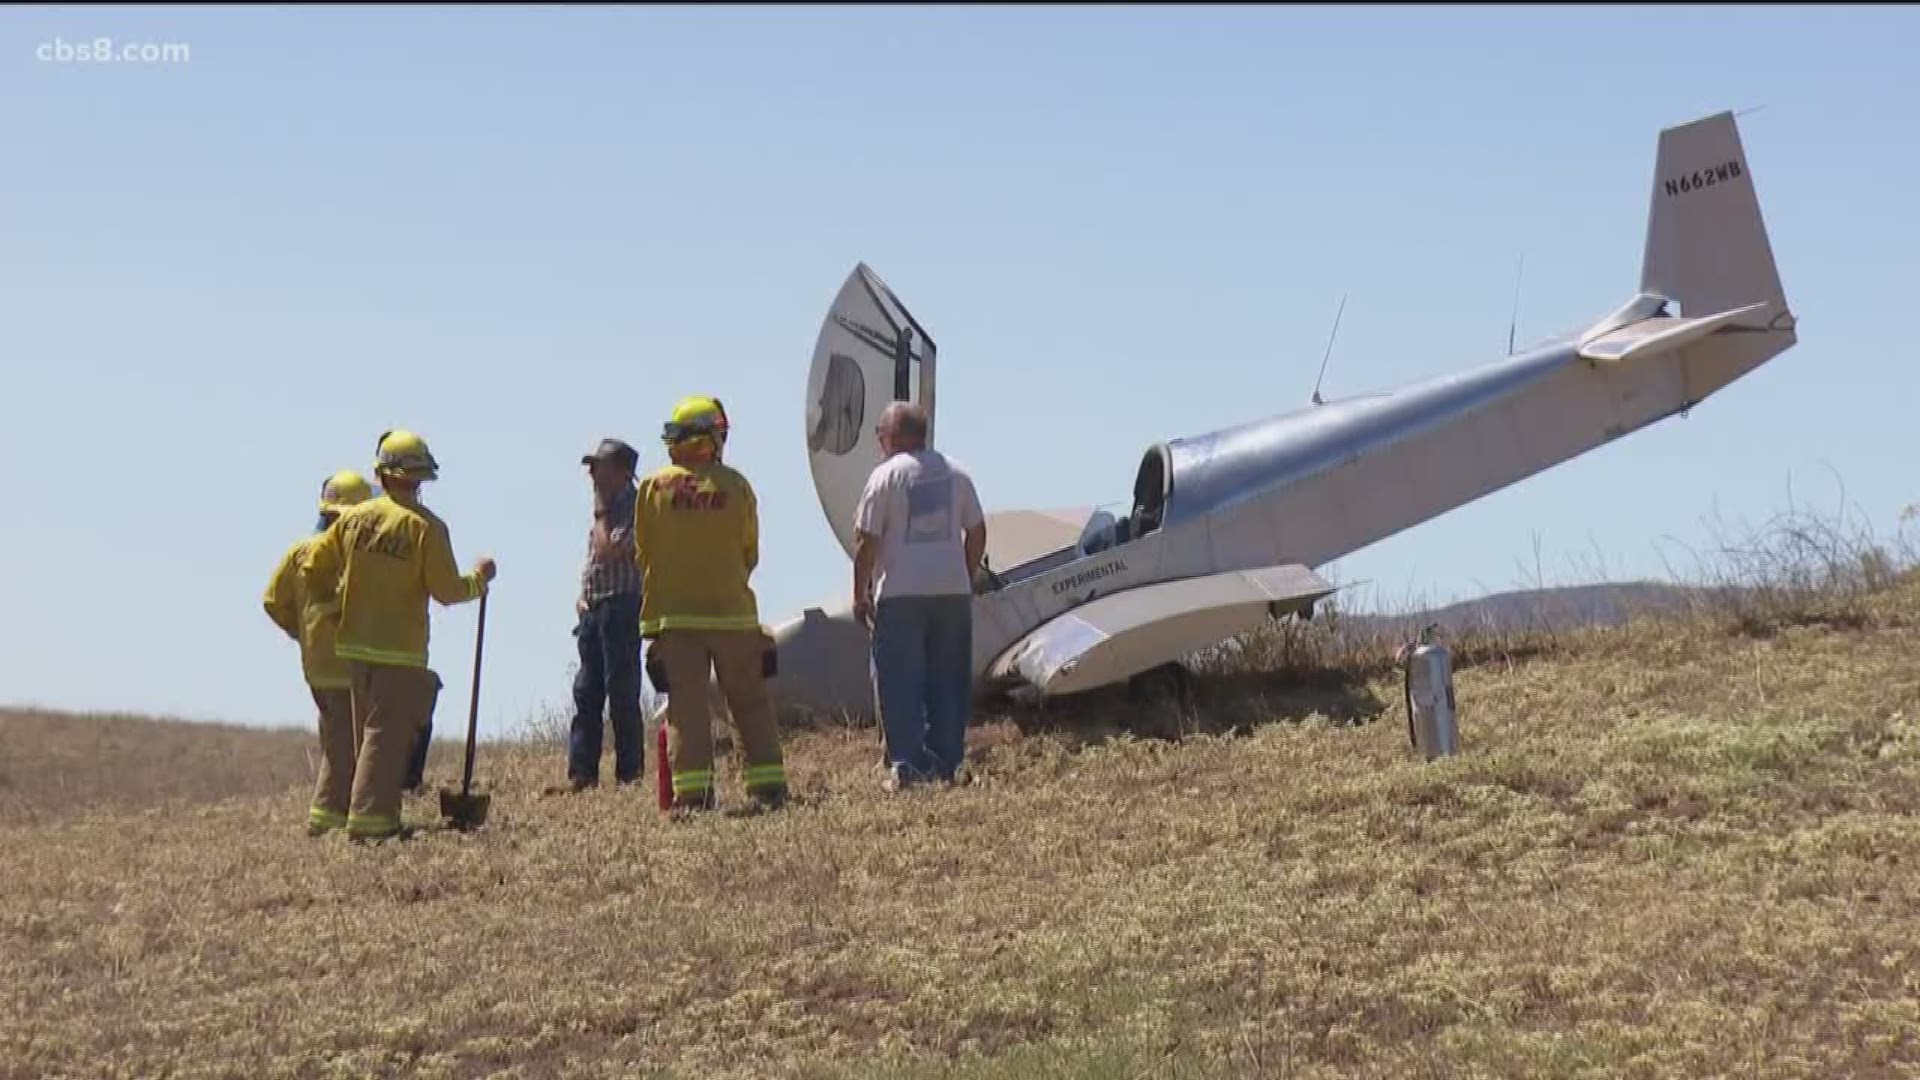 A pilot walked away unharmed from a crash landing Thursday morning. The single-engine plane went down in a field just a few hundred feet from Jamul Casino.